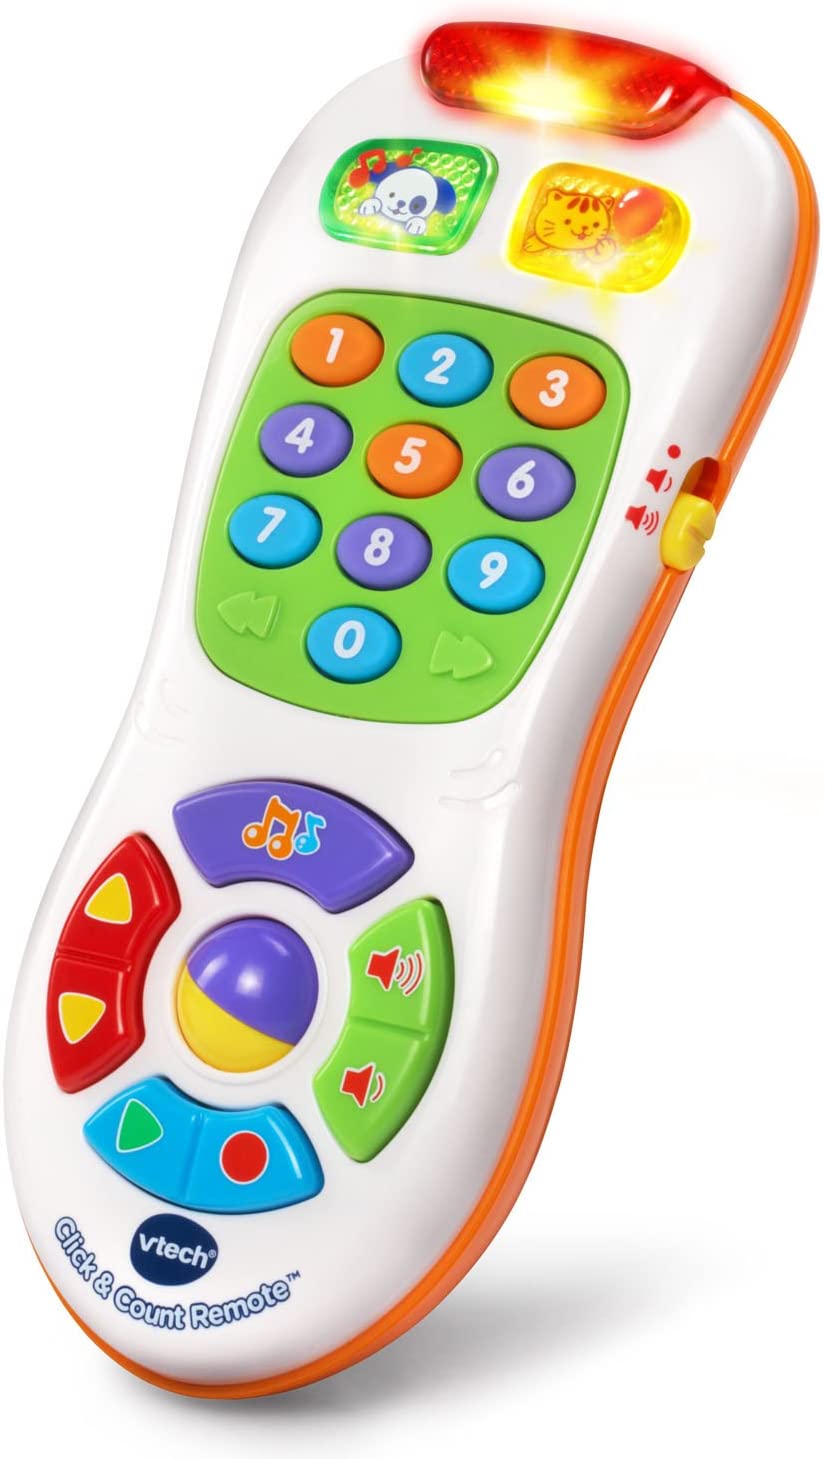 VTech Click and Count Remote, White - for Ages 6 to 36 Months